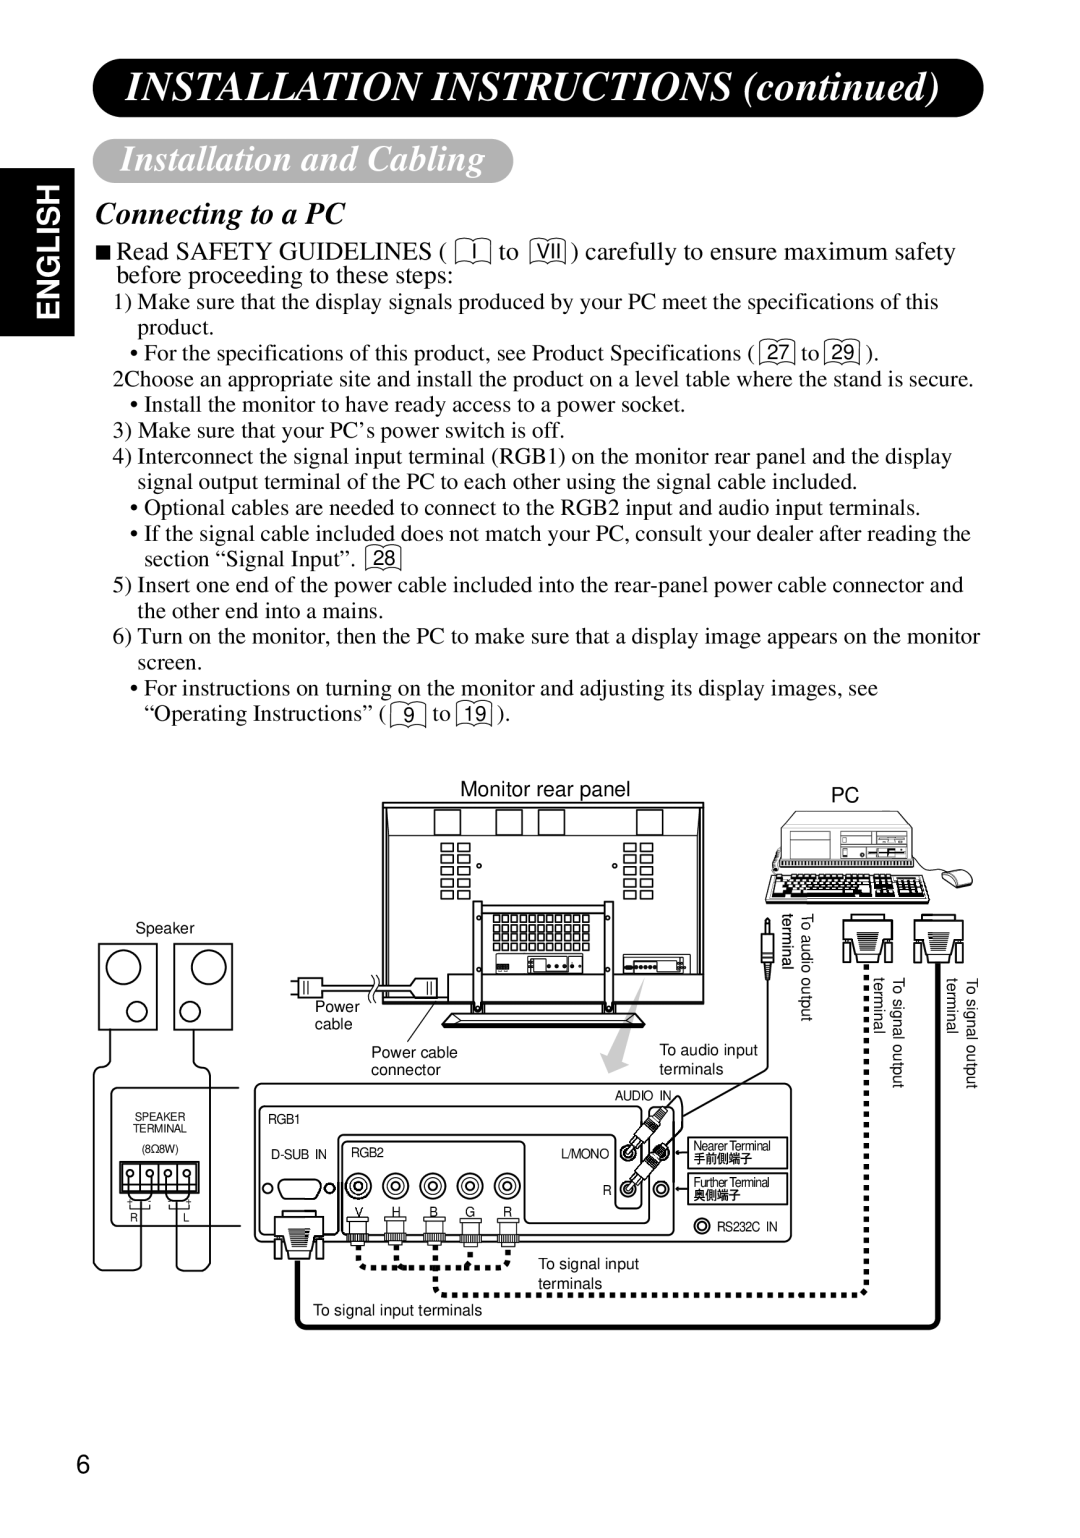 Hitachi Koki USA CMP4120HDUS Installation and Cabling, Connecting to a PC, INSTALLATION INSTRUCTIONS continued, English 